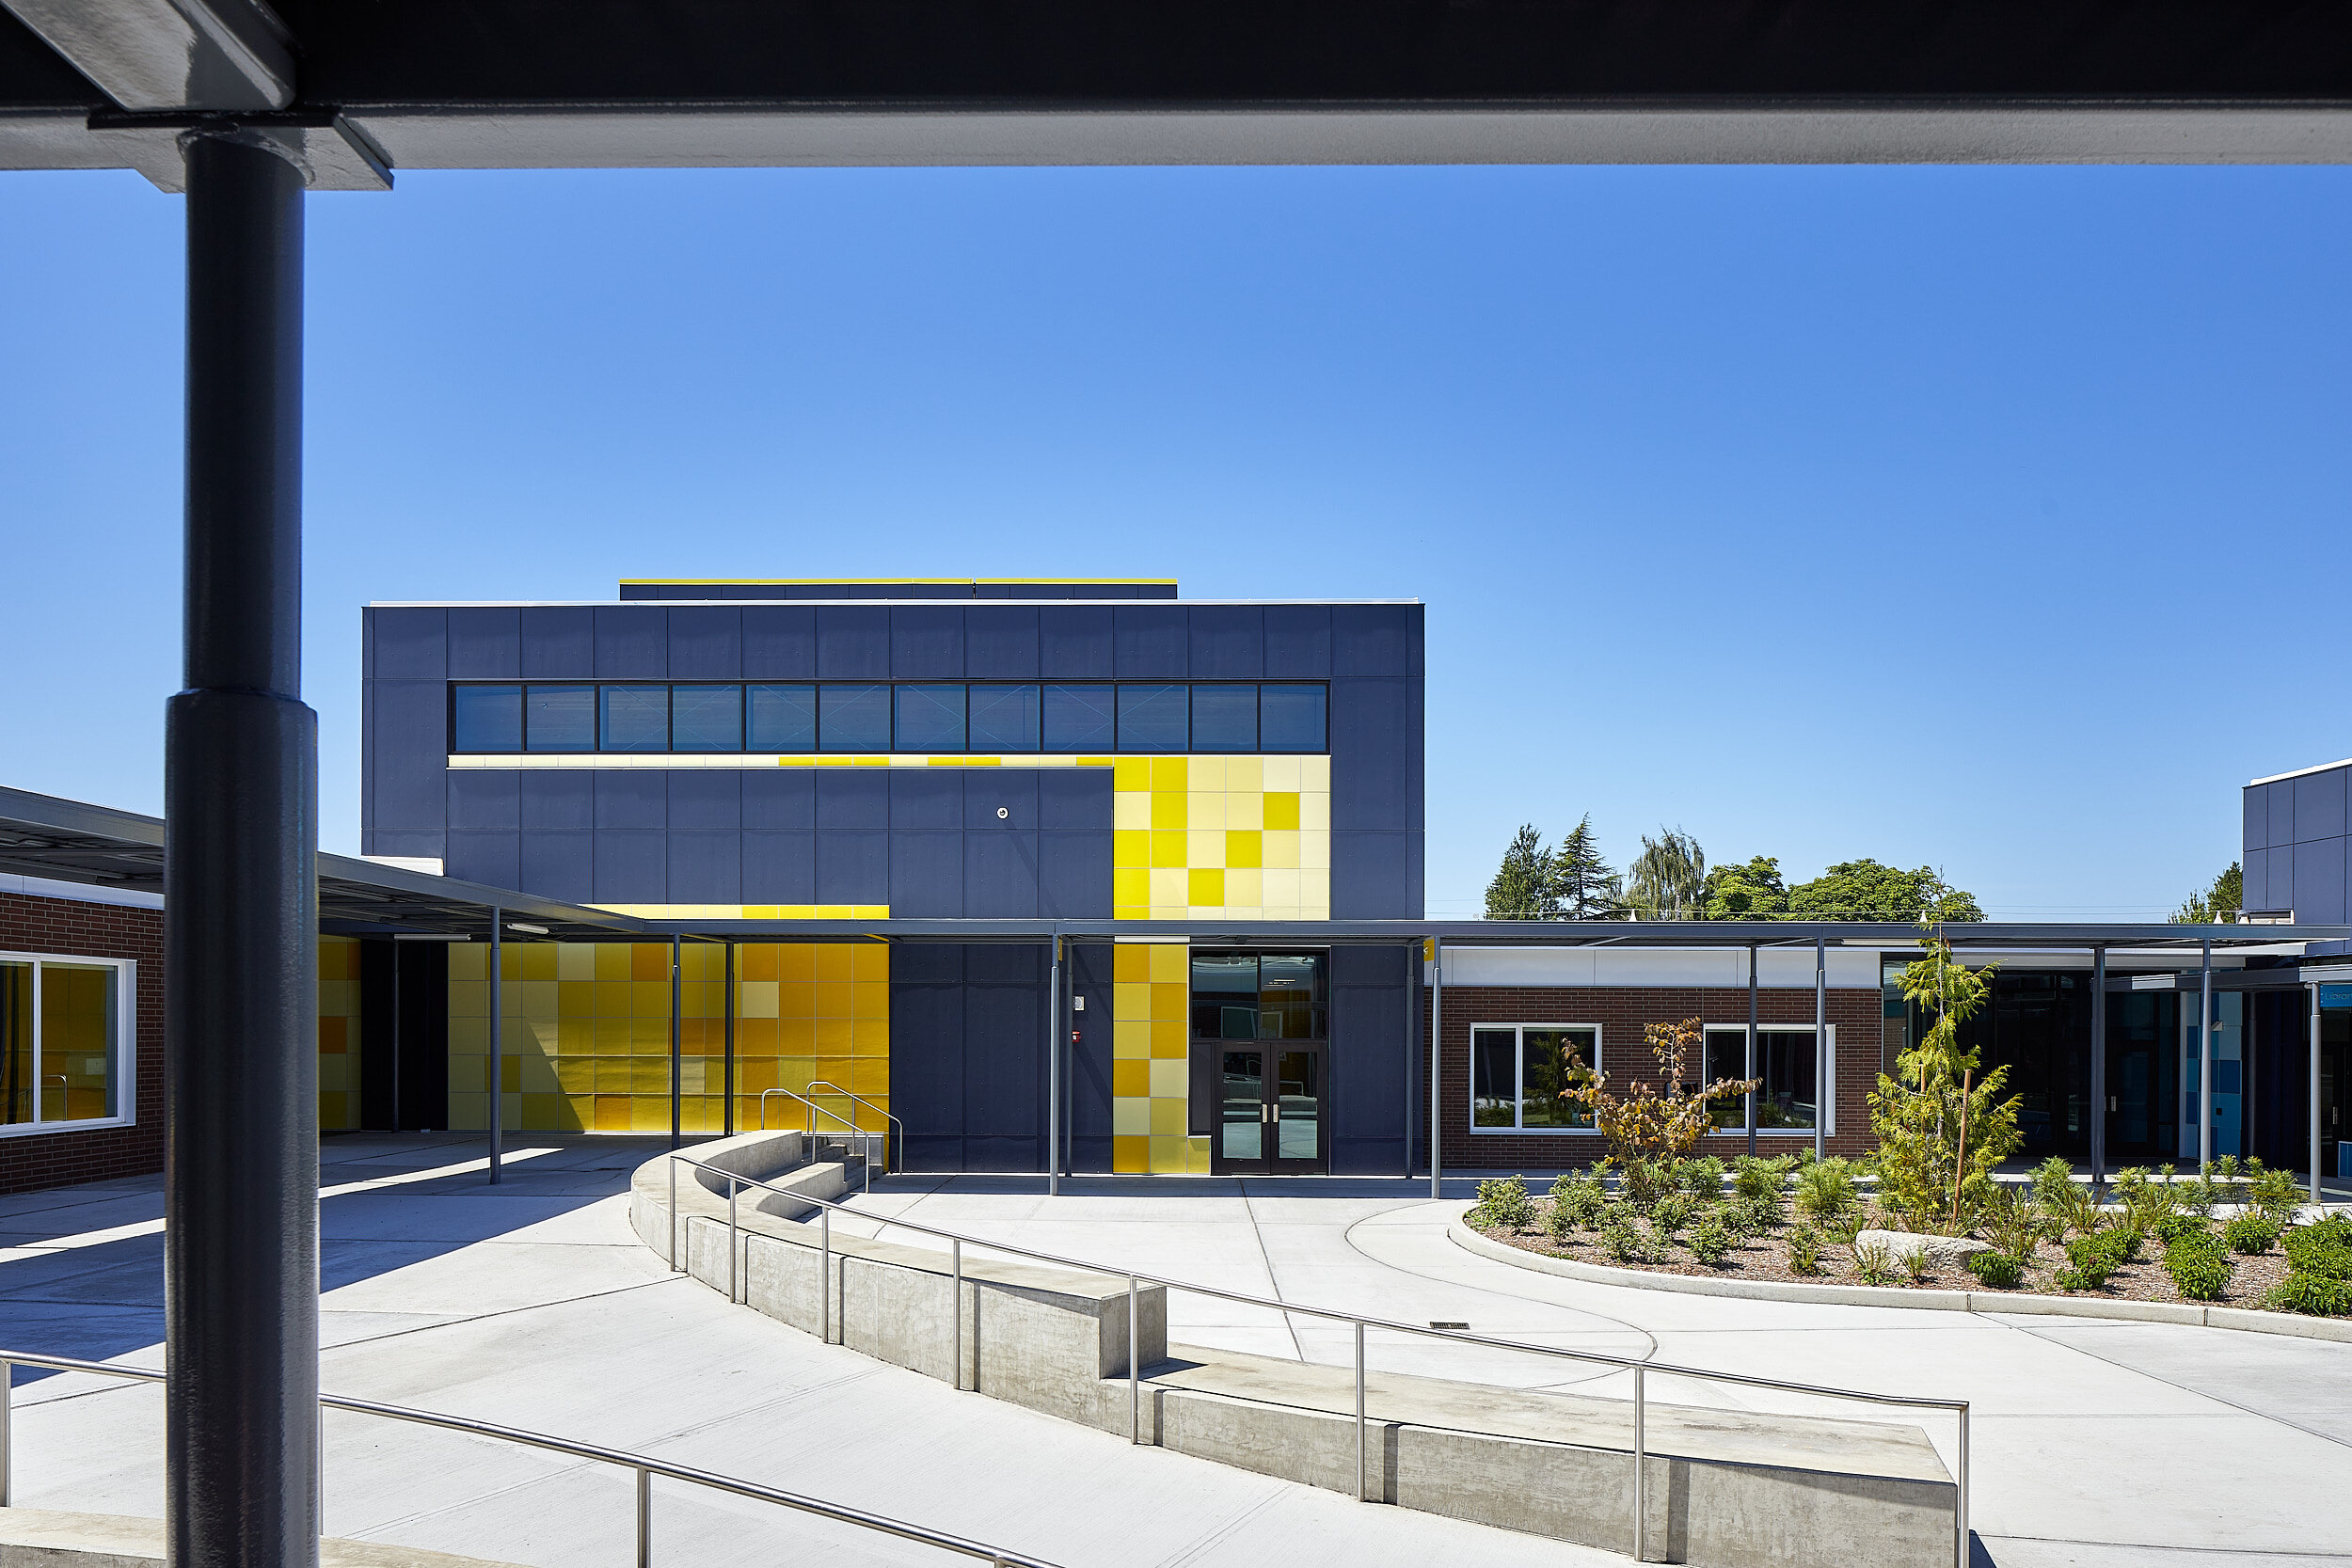 Grant Center for the Expressive Arts - Korsmo Construction / McGranahan Architects